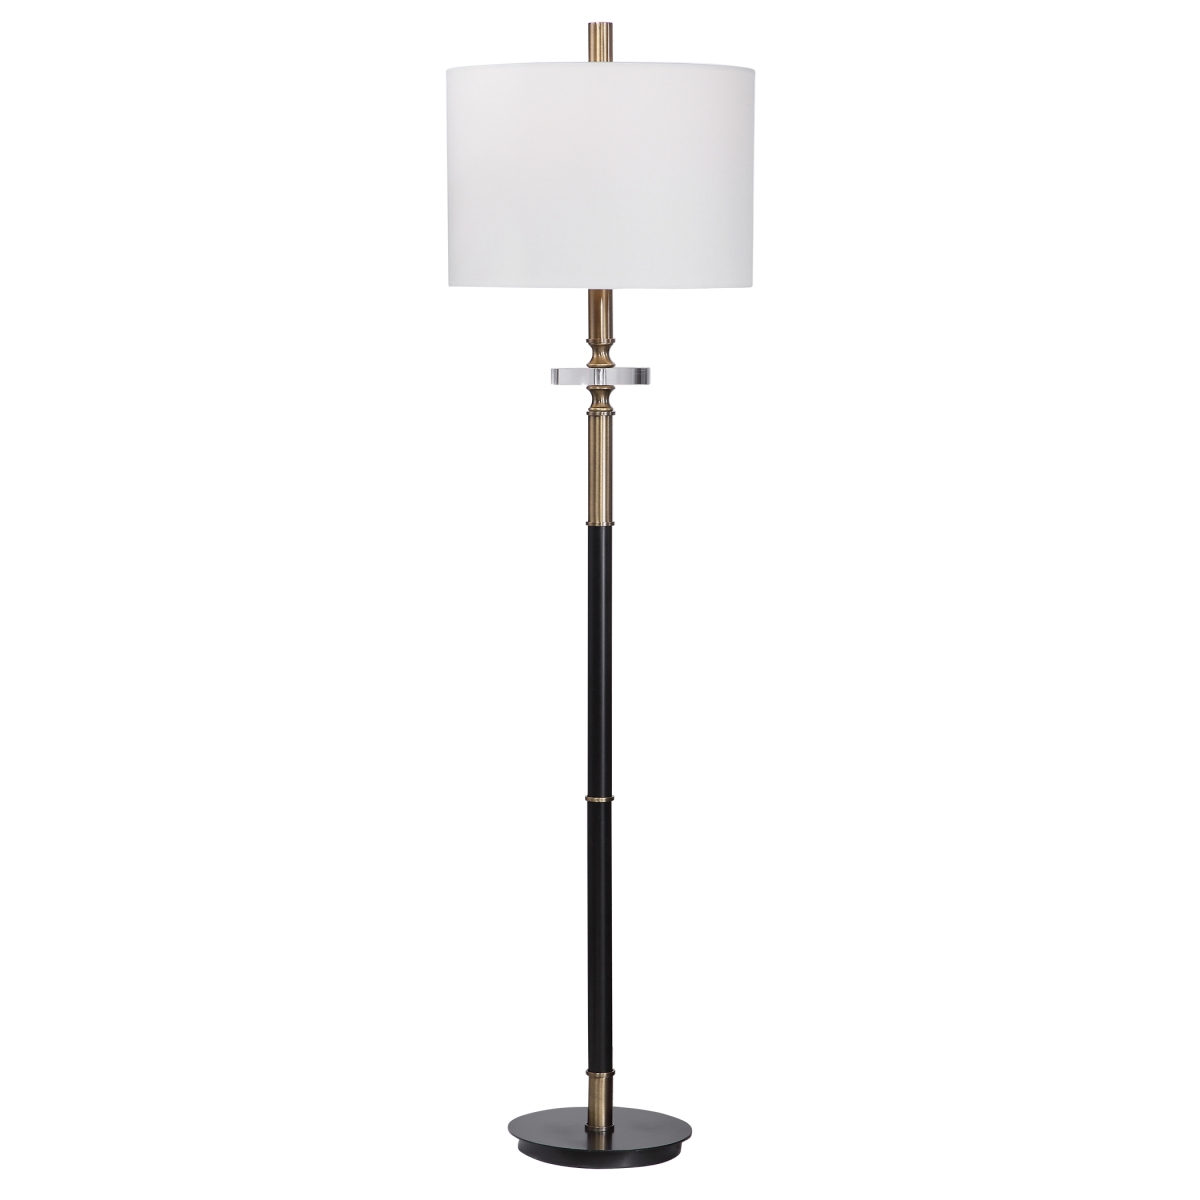 Picture of 212 Main 28196-1 Maud Aged Black Floor Lamp